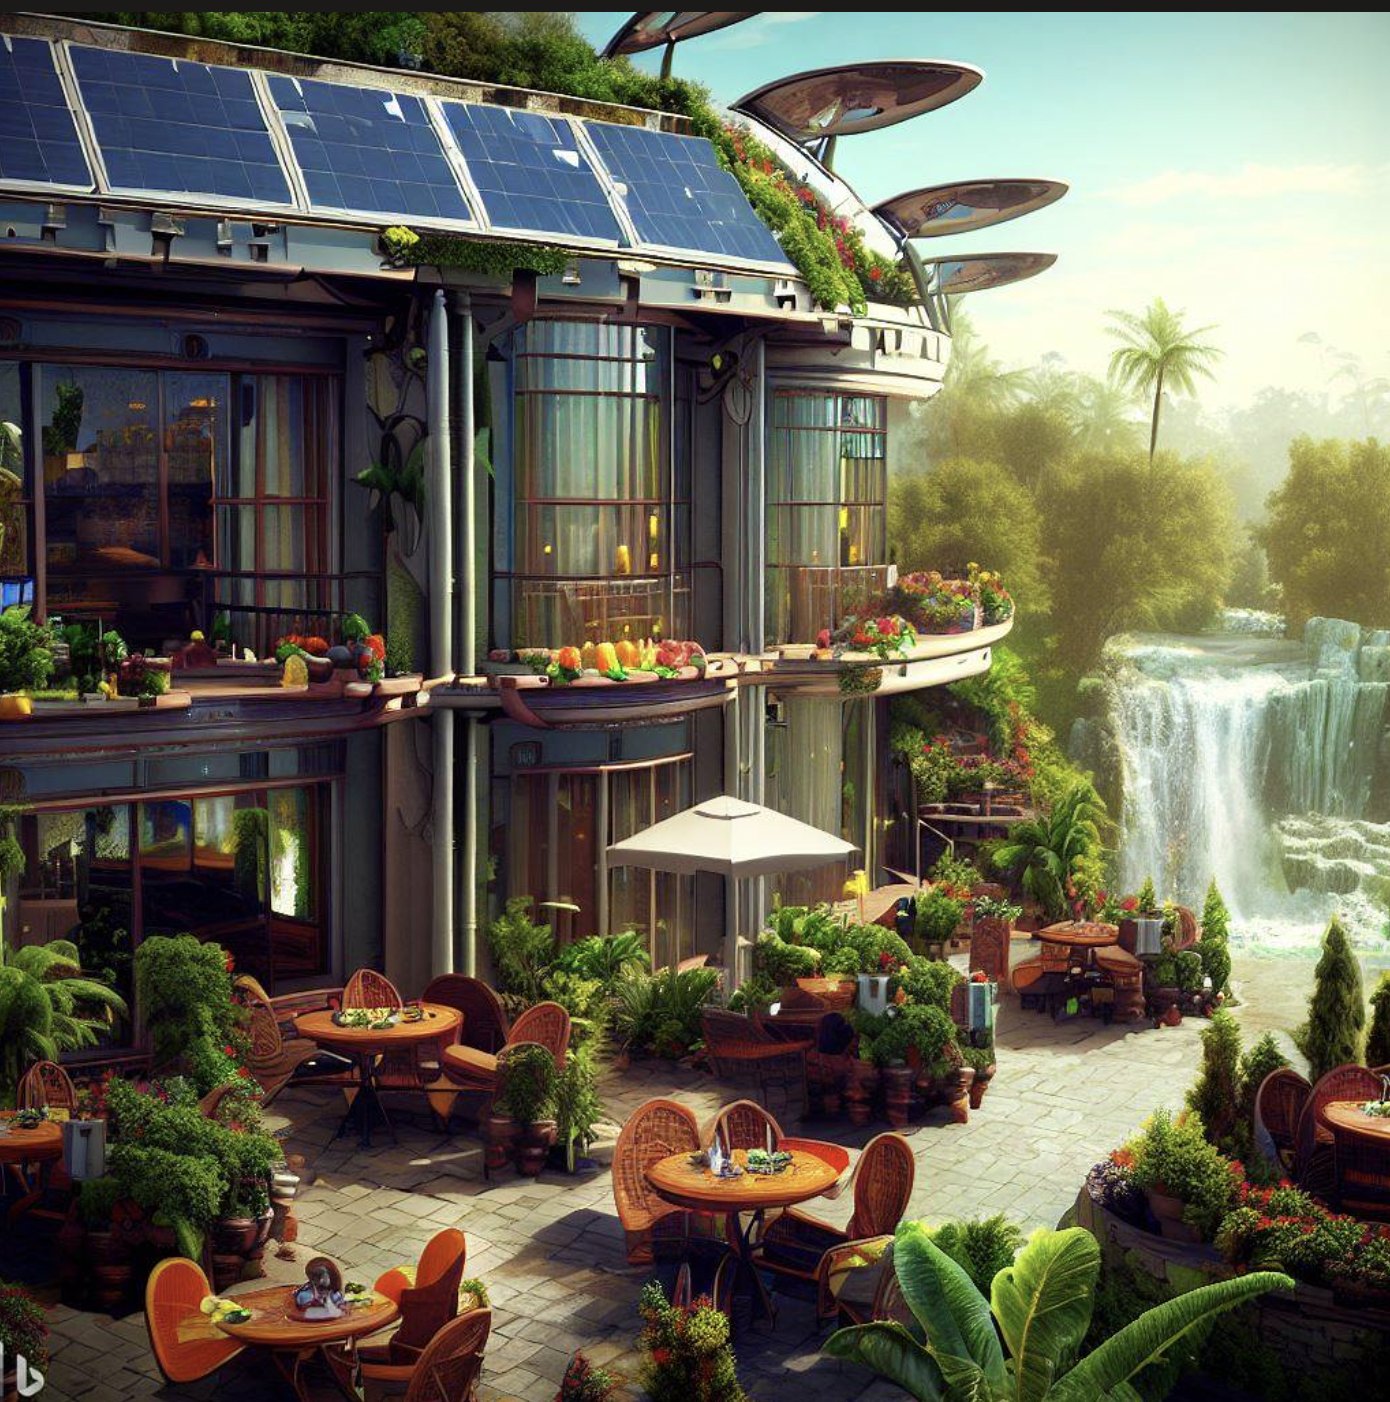 Jeremiah Owyang on X: Solarpunk is about technology serving